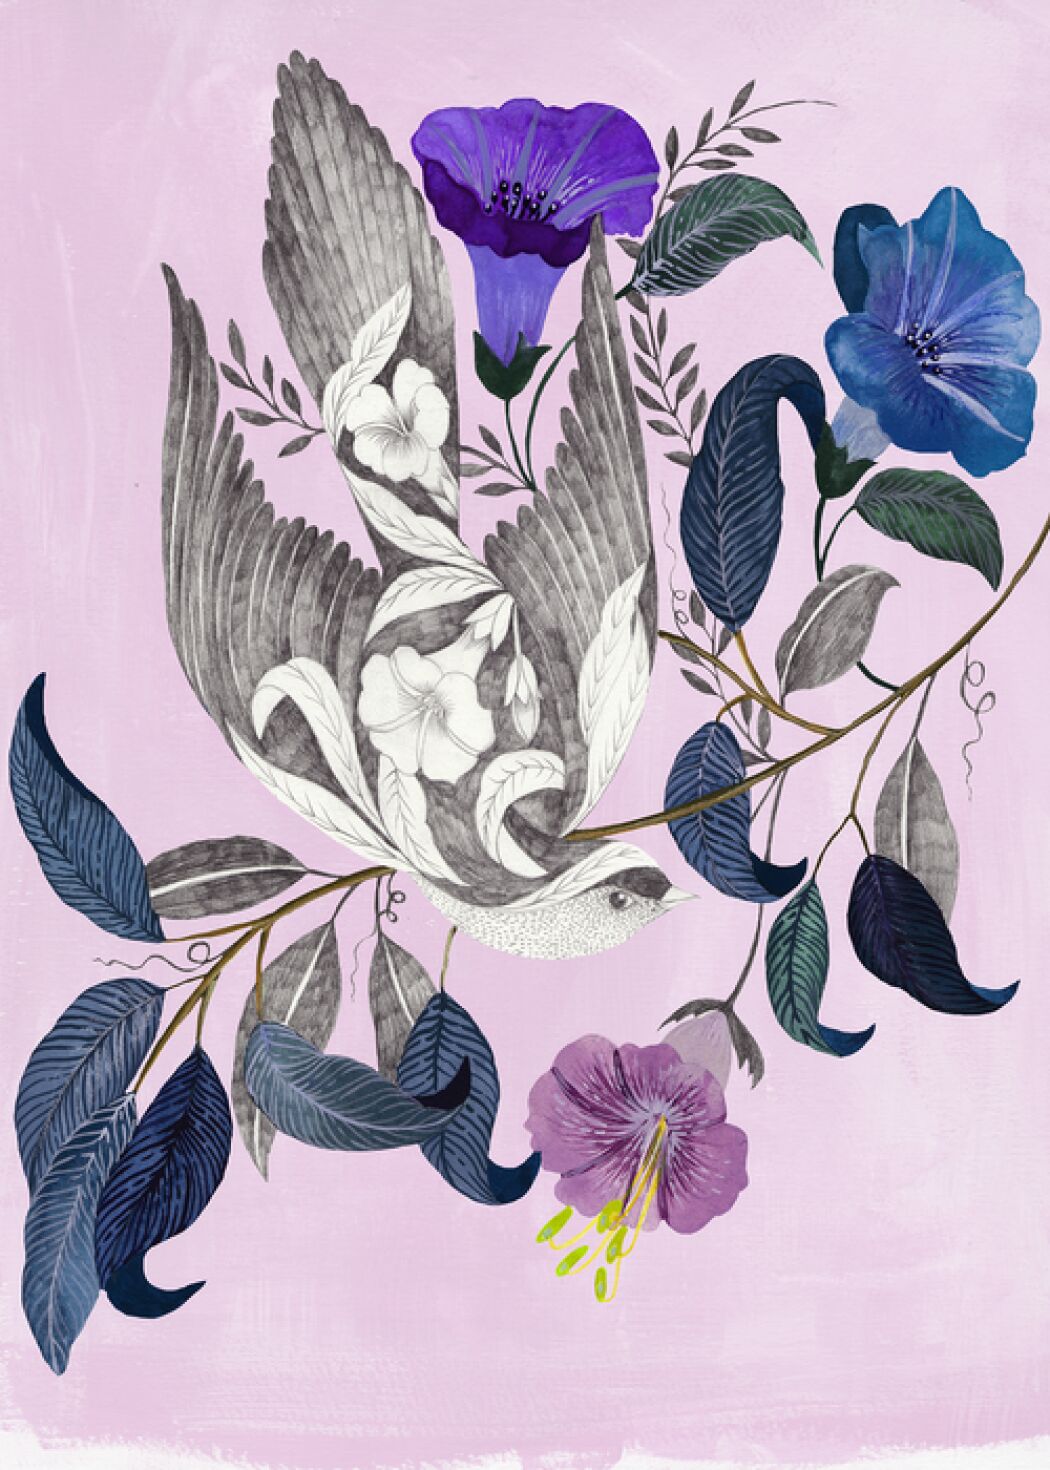 Bird and flowers in a lovely composition by the illustrator Malin Gyllensvaan